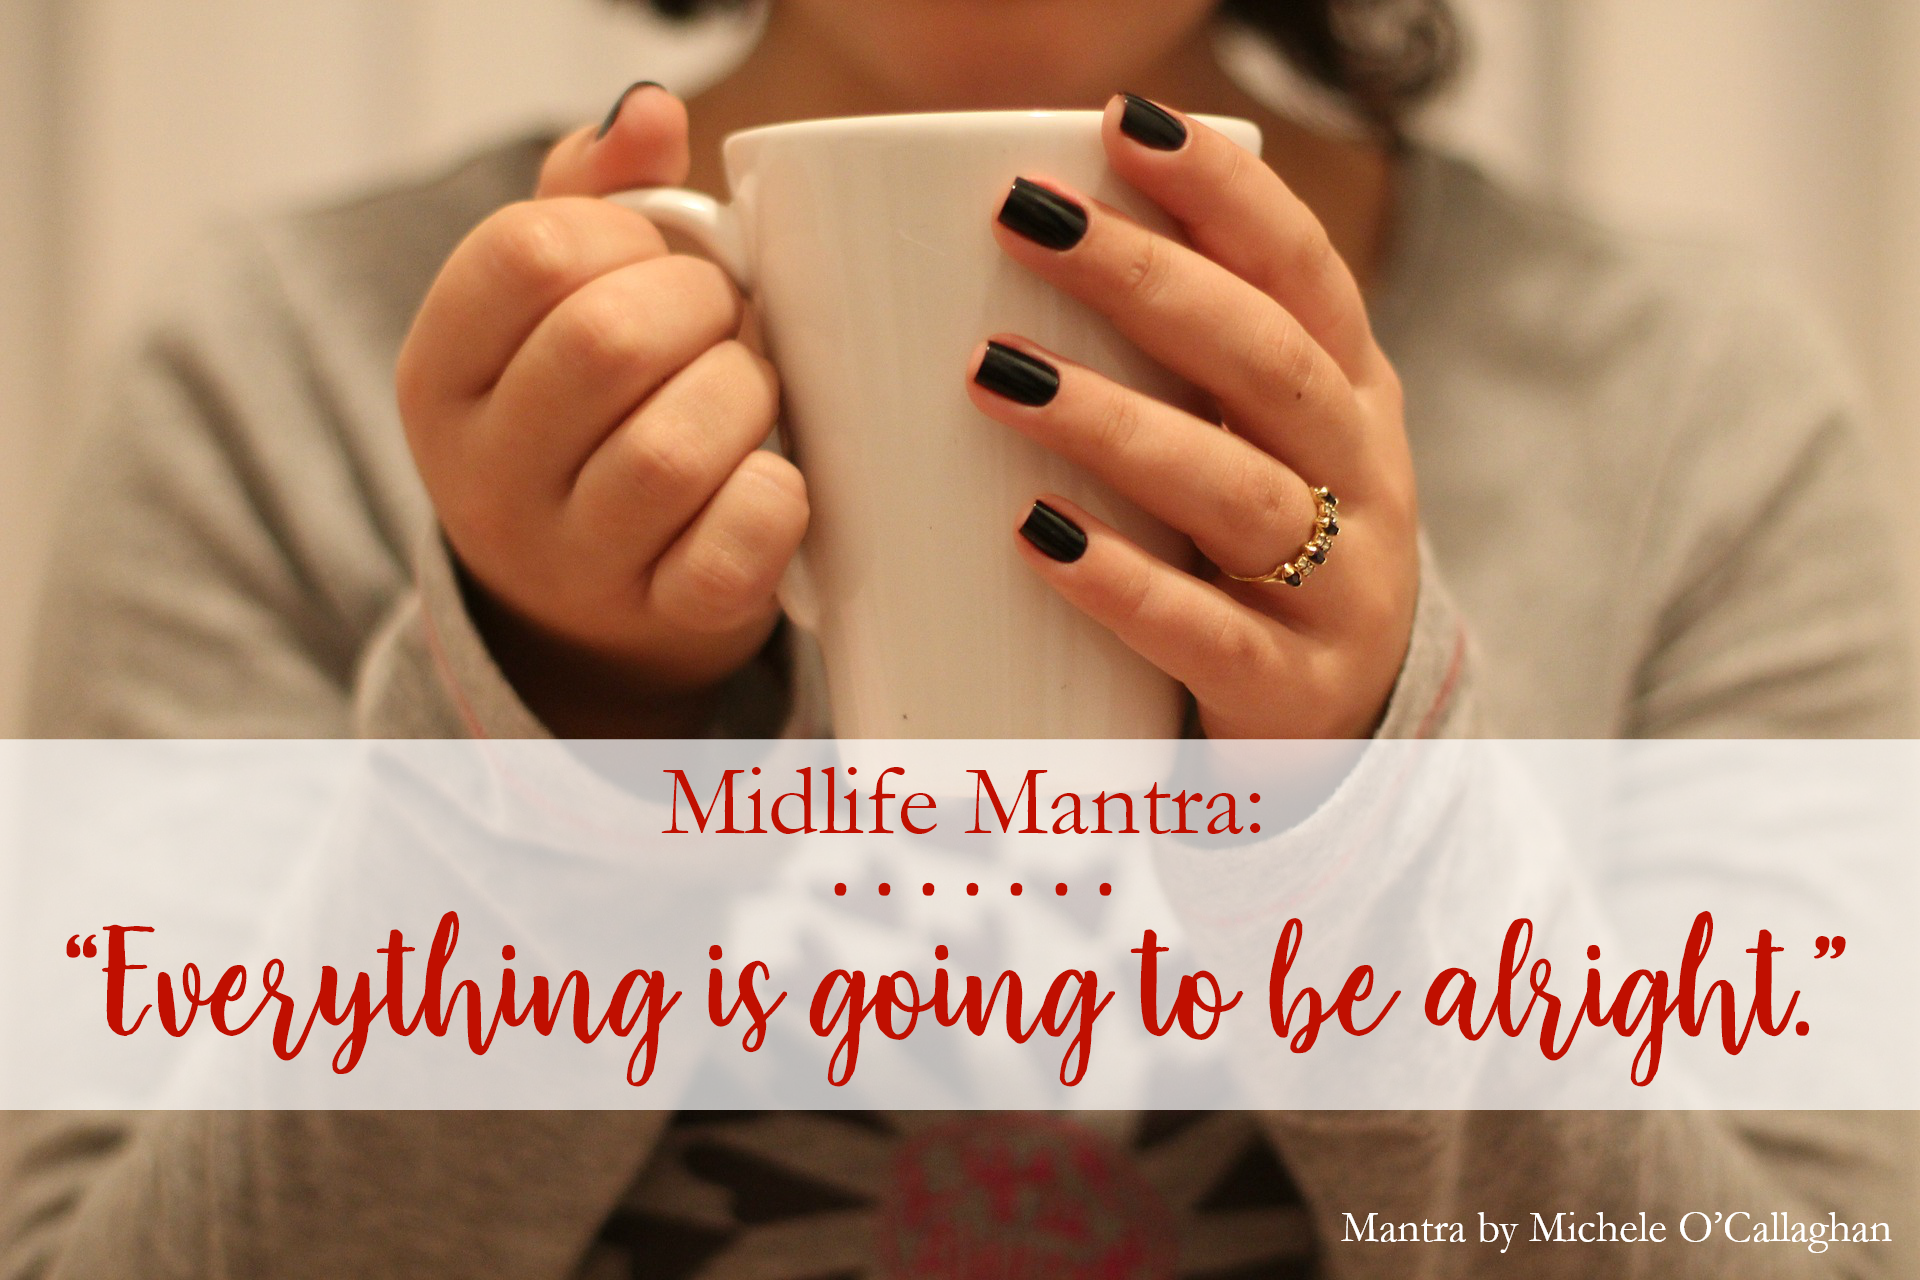 Midlife Mantra: Everything is Going to Be Alright